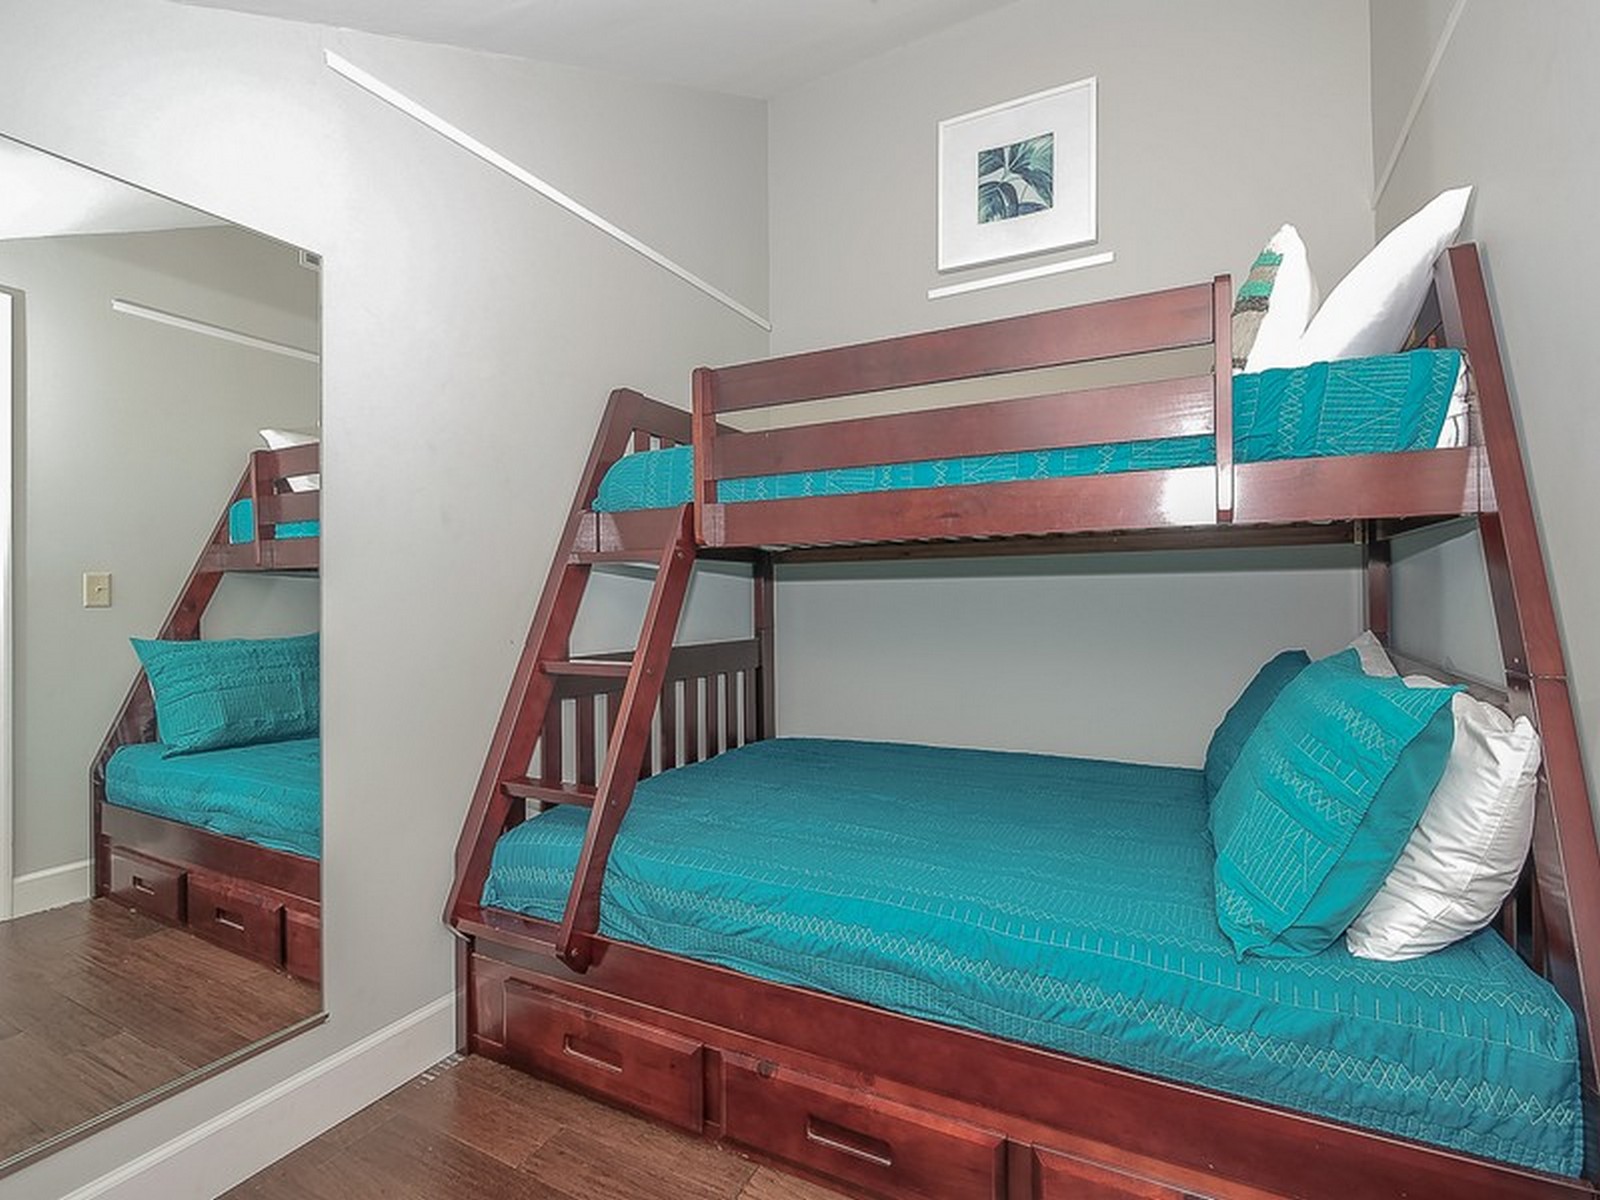 17-South-Live-OakKing-Bedroom-with-Bunk-Beds-12084-big.jpeg